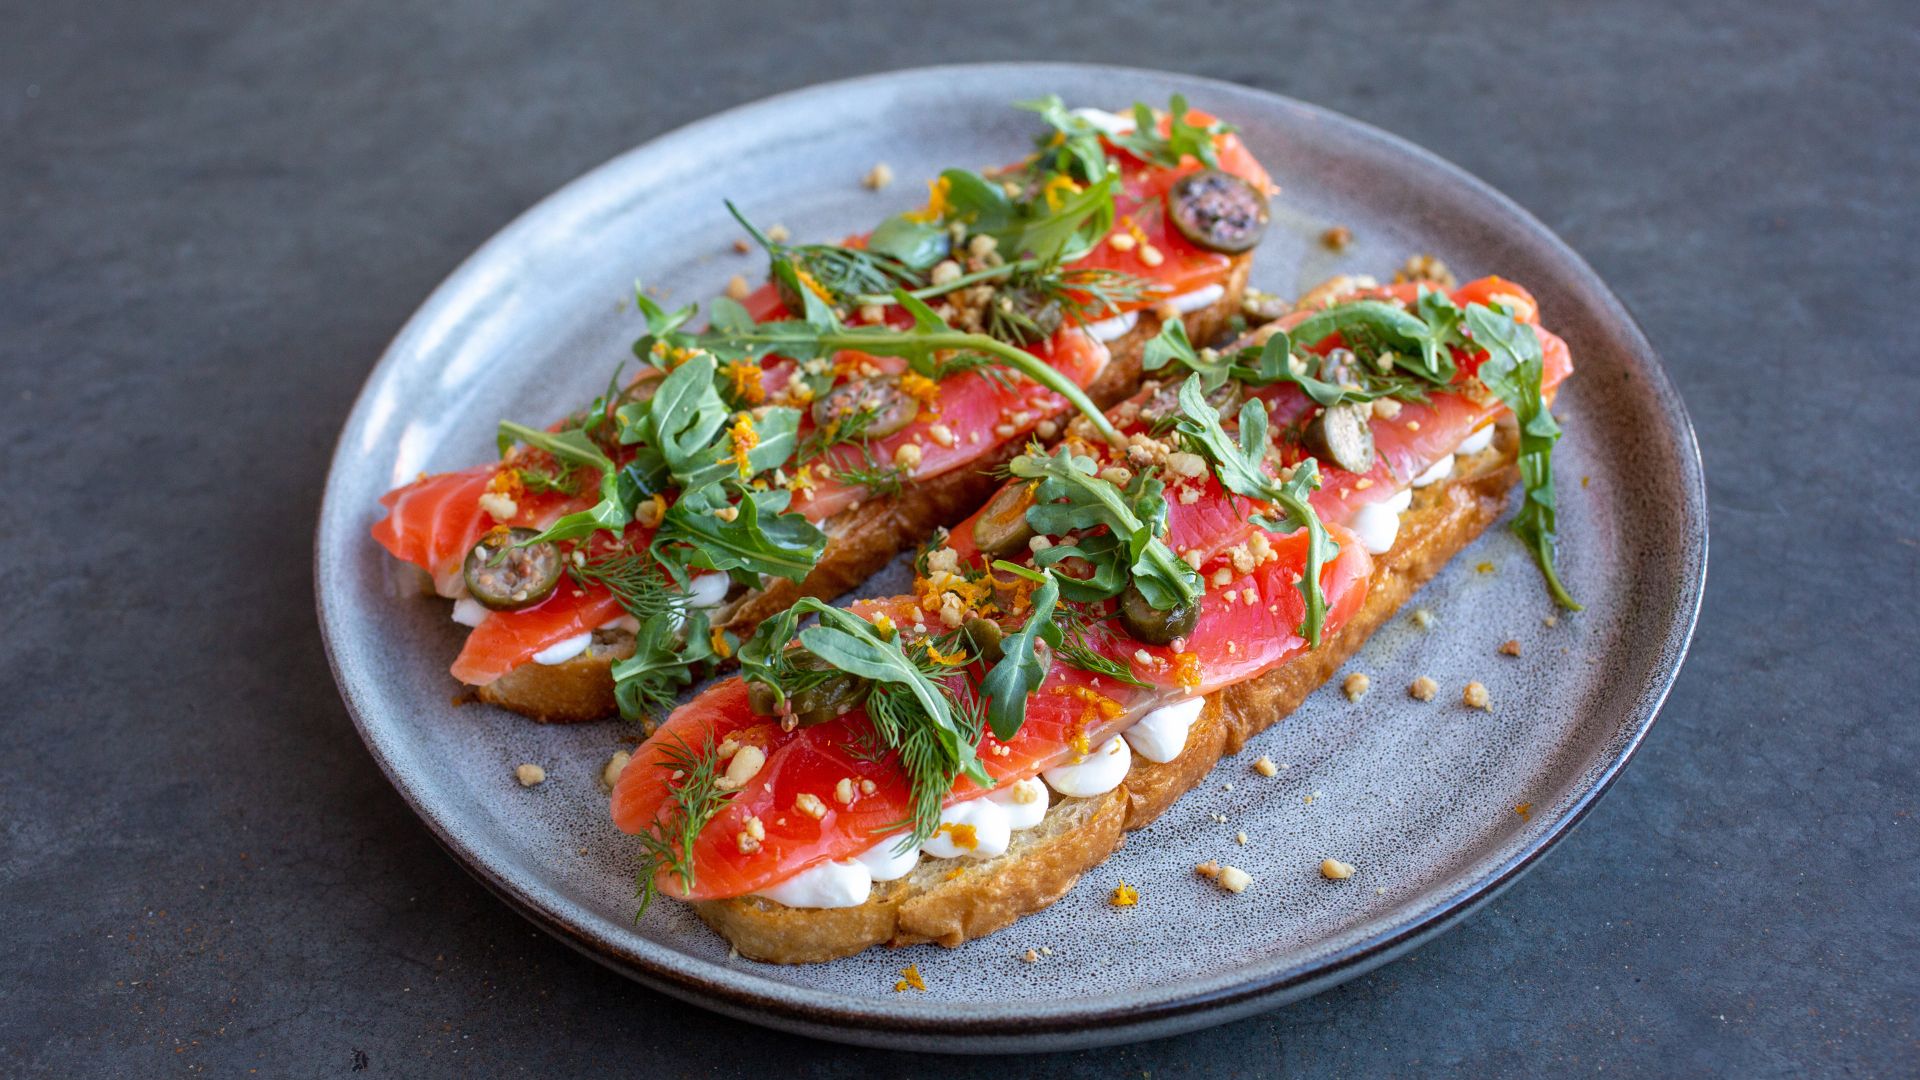 Katie's Pizza and Pasta Osteria serves brunch dishes such as salmon toast.